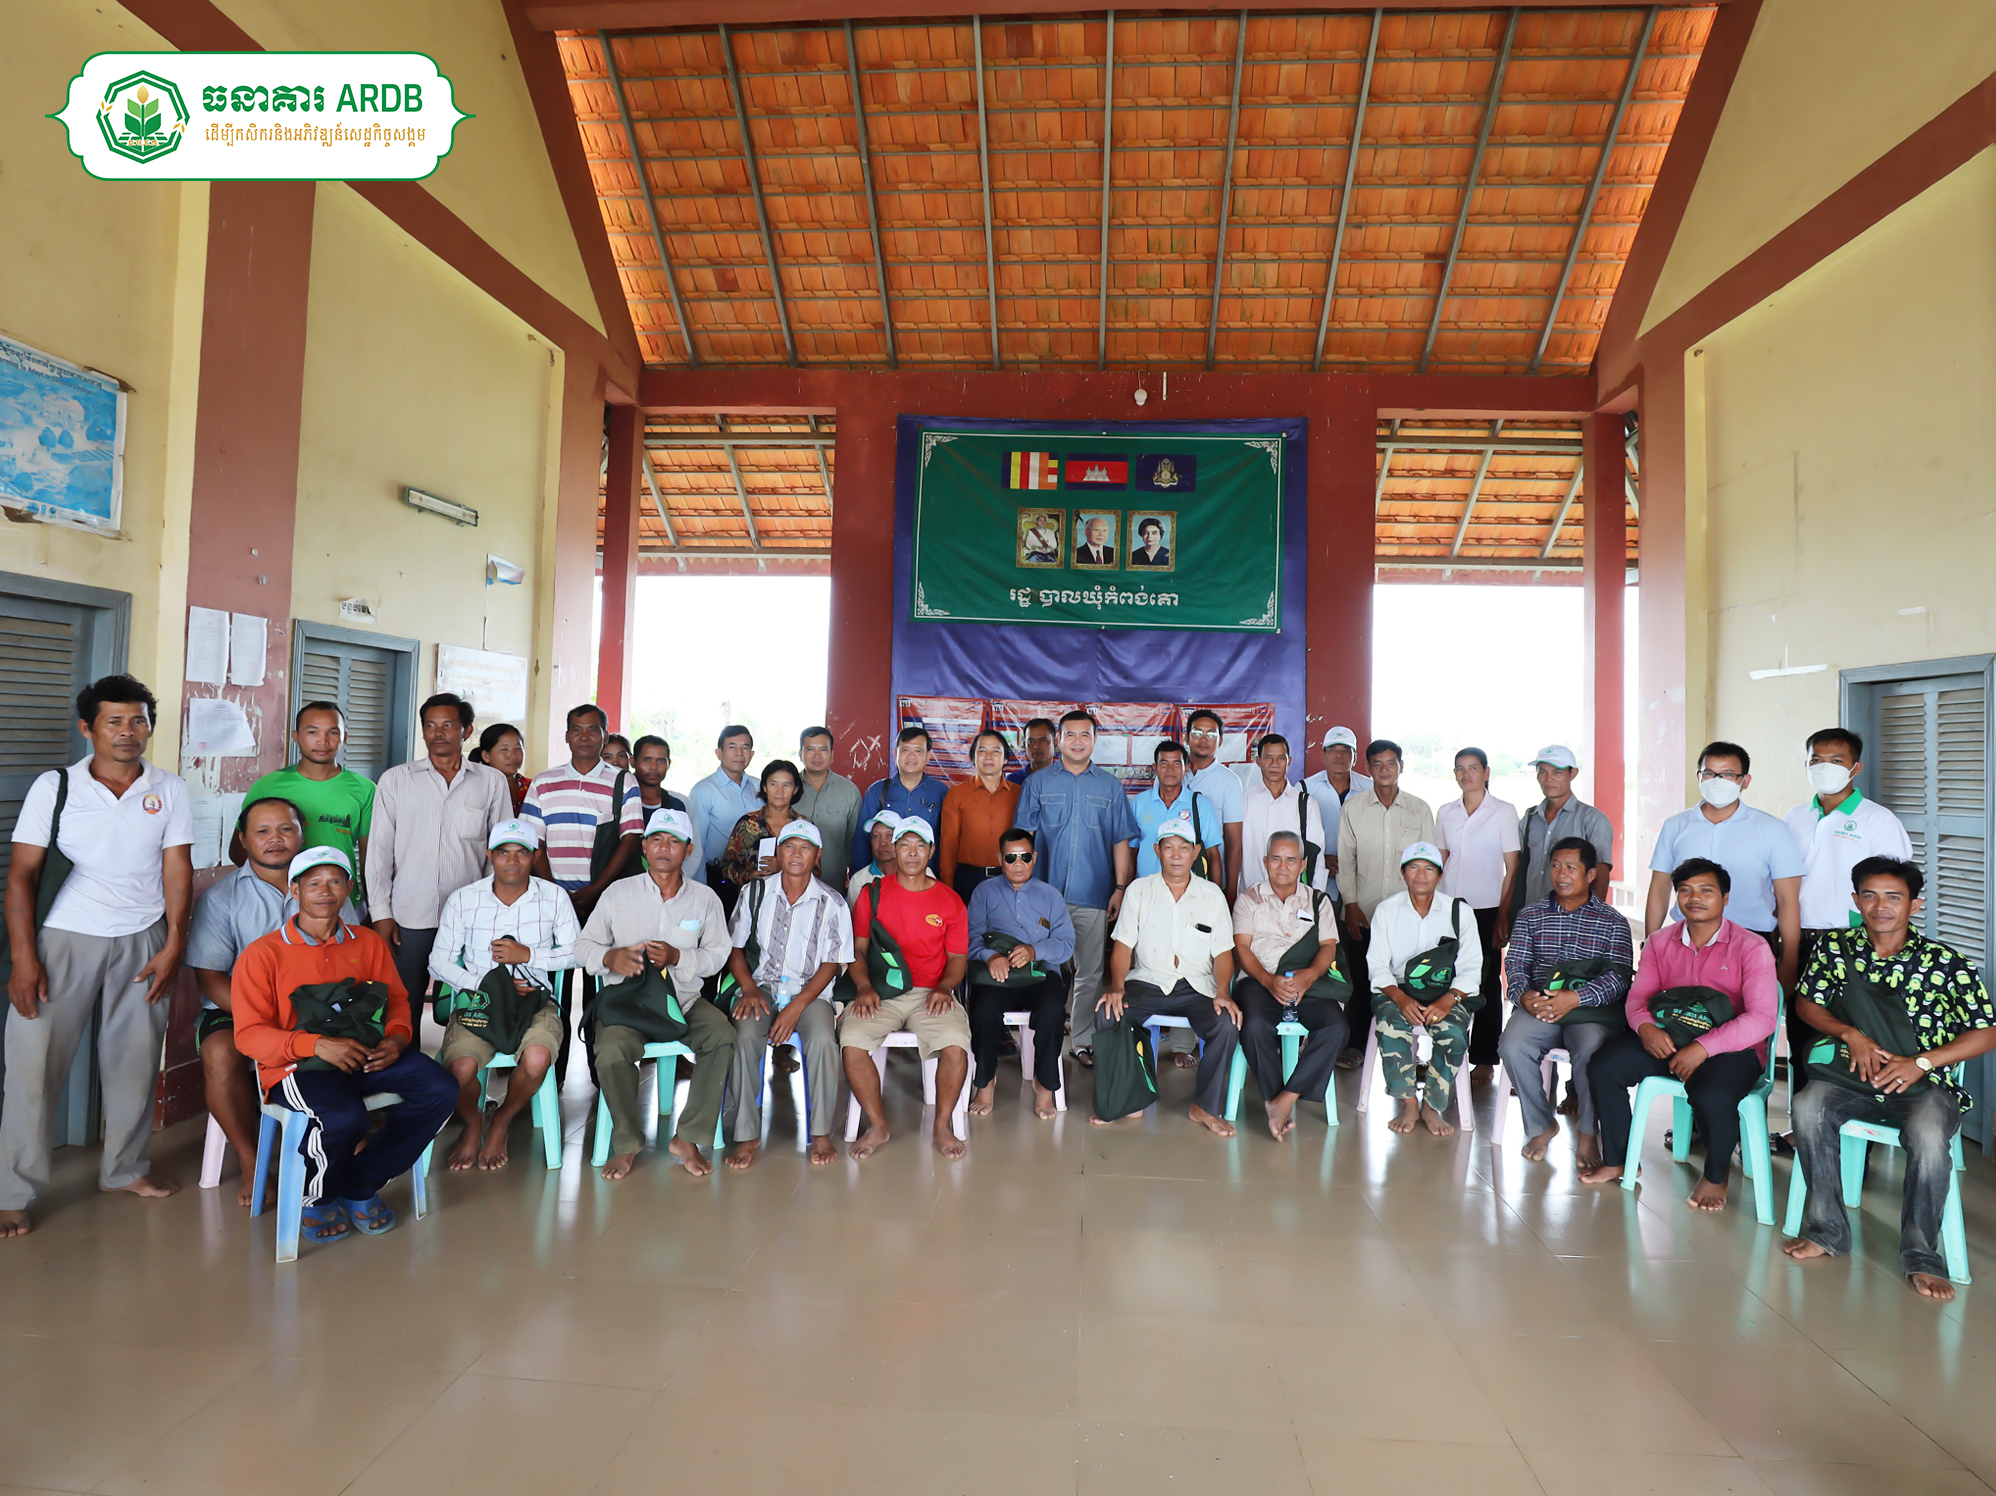 H.E. KAO Thach, has visited paddy rice farmers (Kompongkor Agricultural Cooperative)